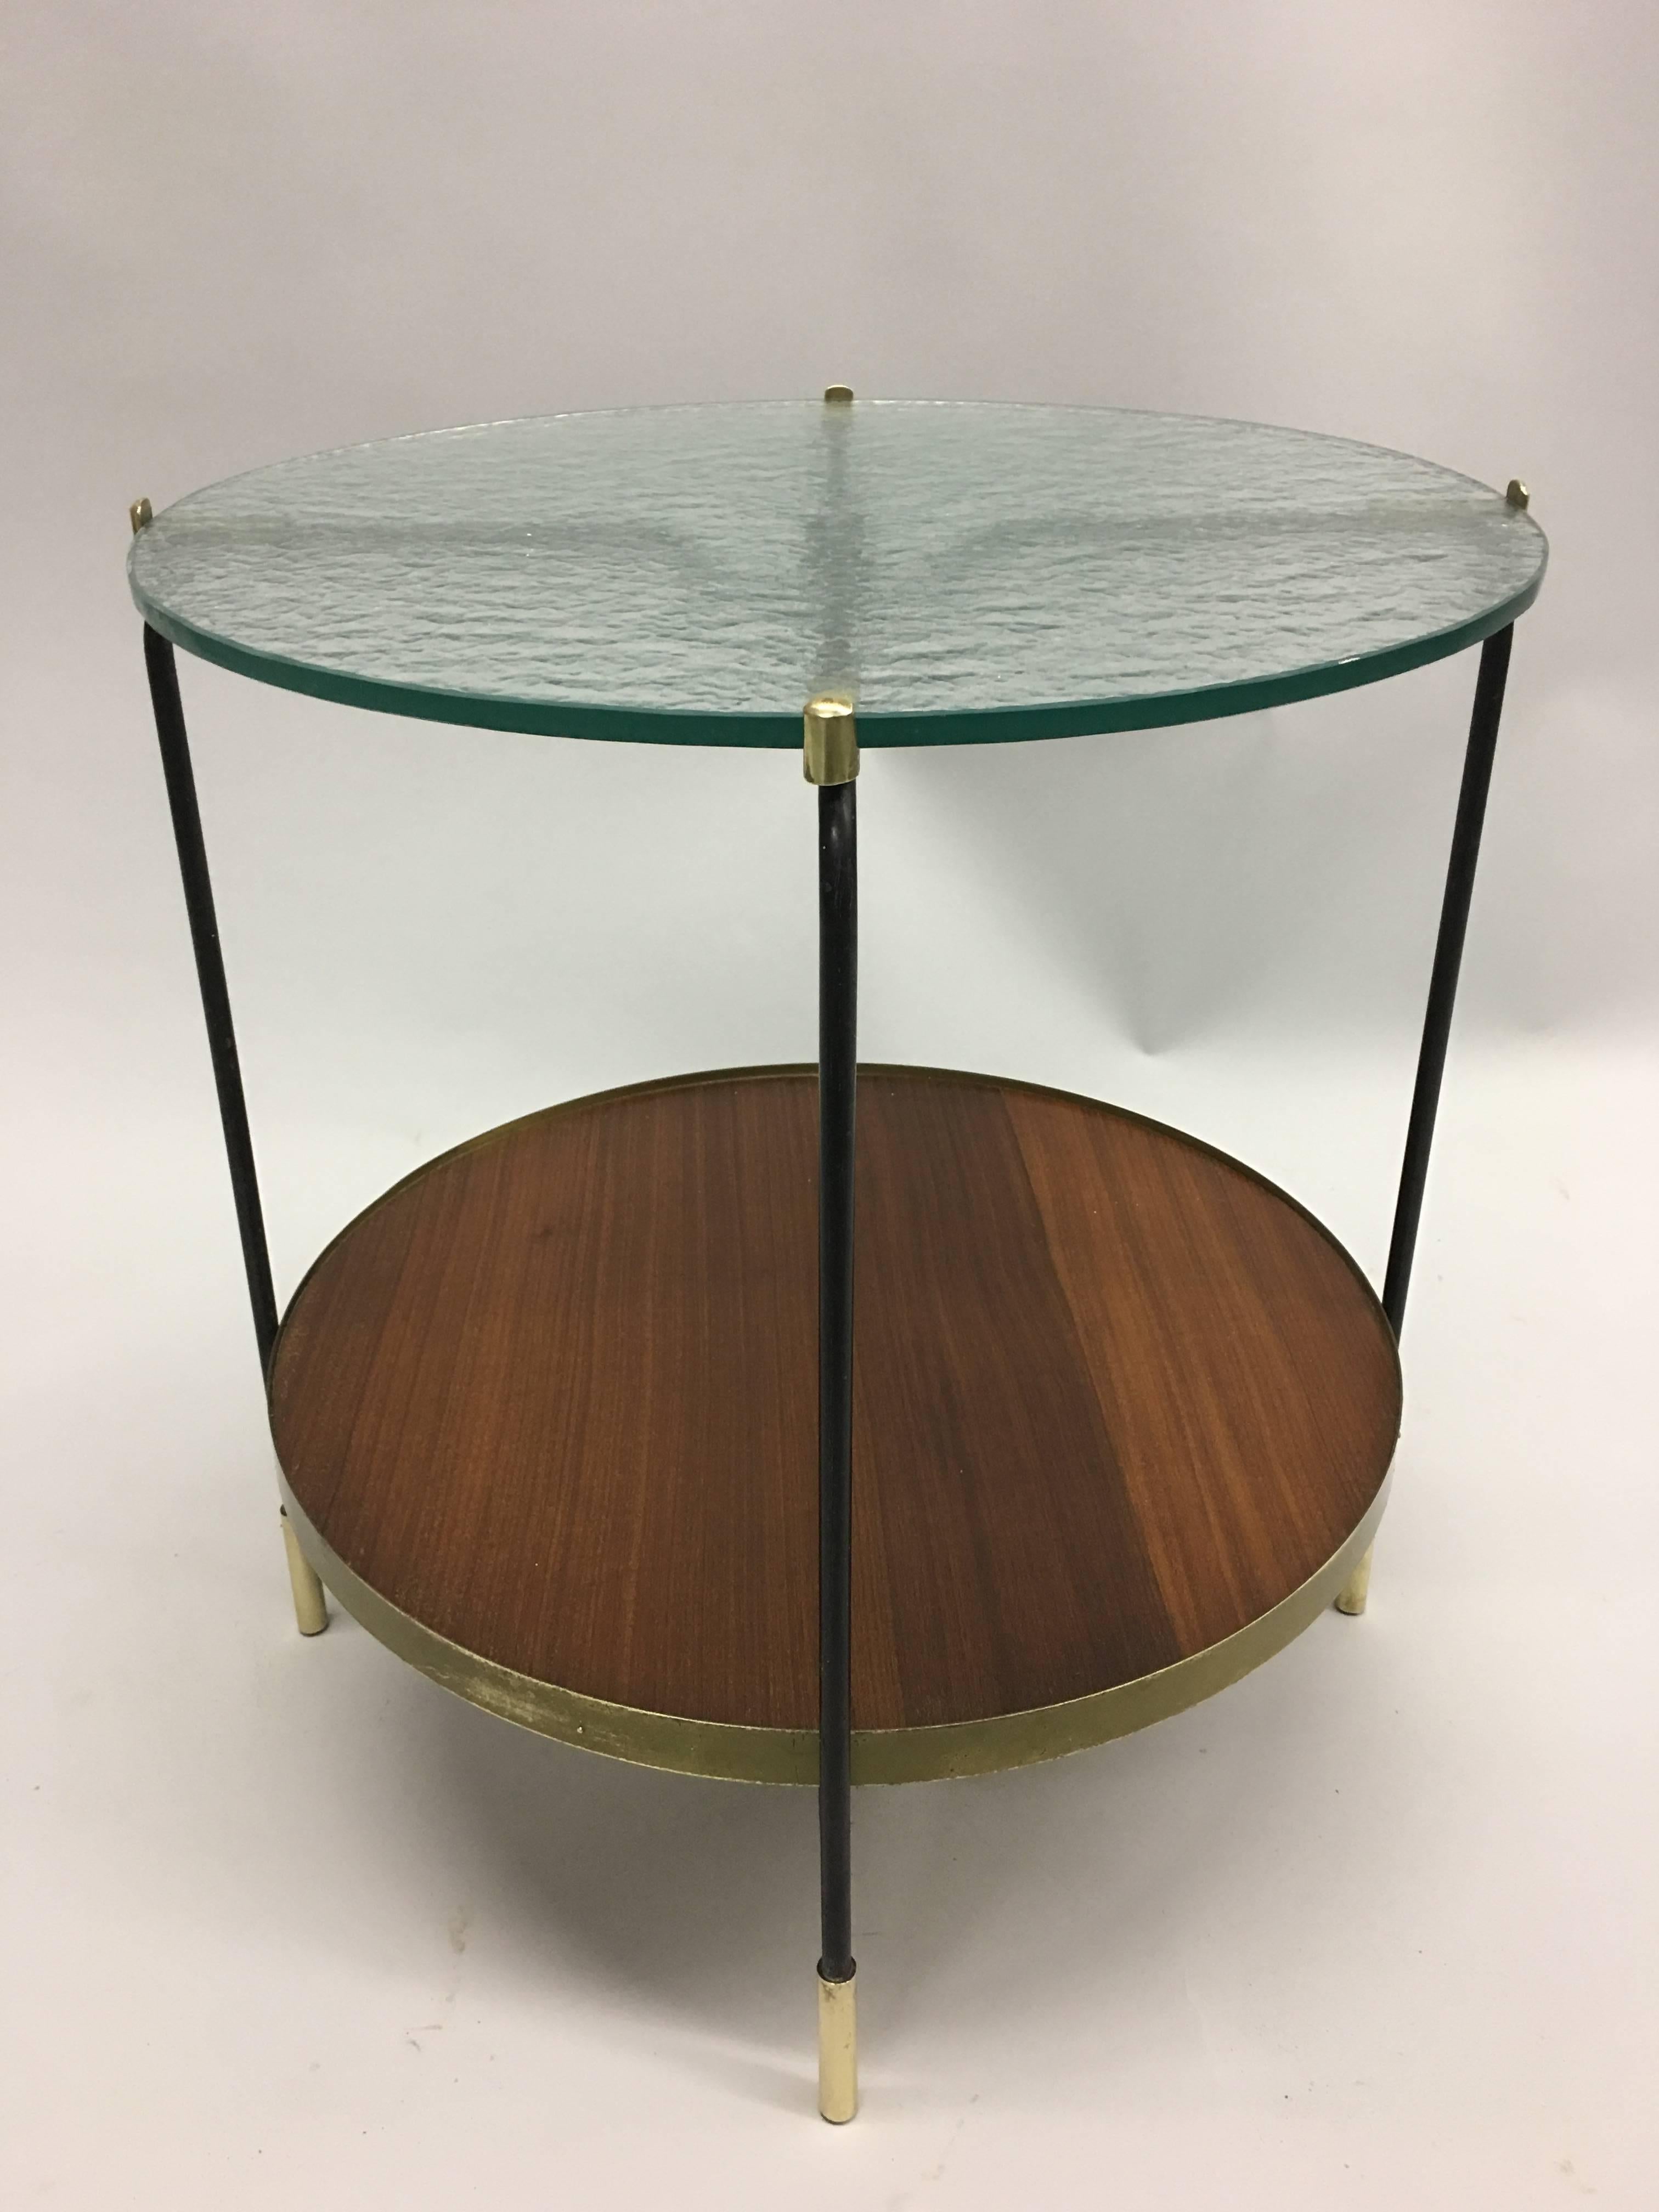 Elegant Italian Mid-Century Modern double level drinks table, side, end, cocktail table or gueridon. 

The piece is composed of a sensitive combination of materials including a black enameled steel frame with brass feet and details, a sand cast